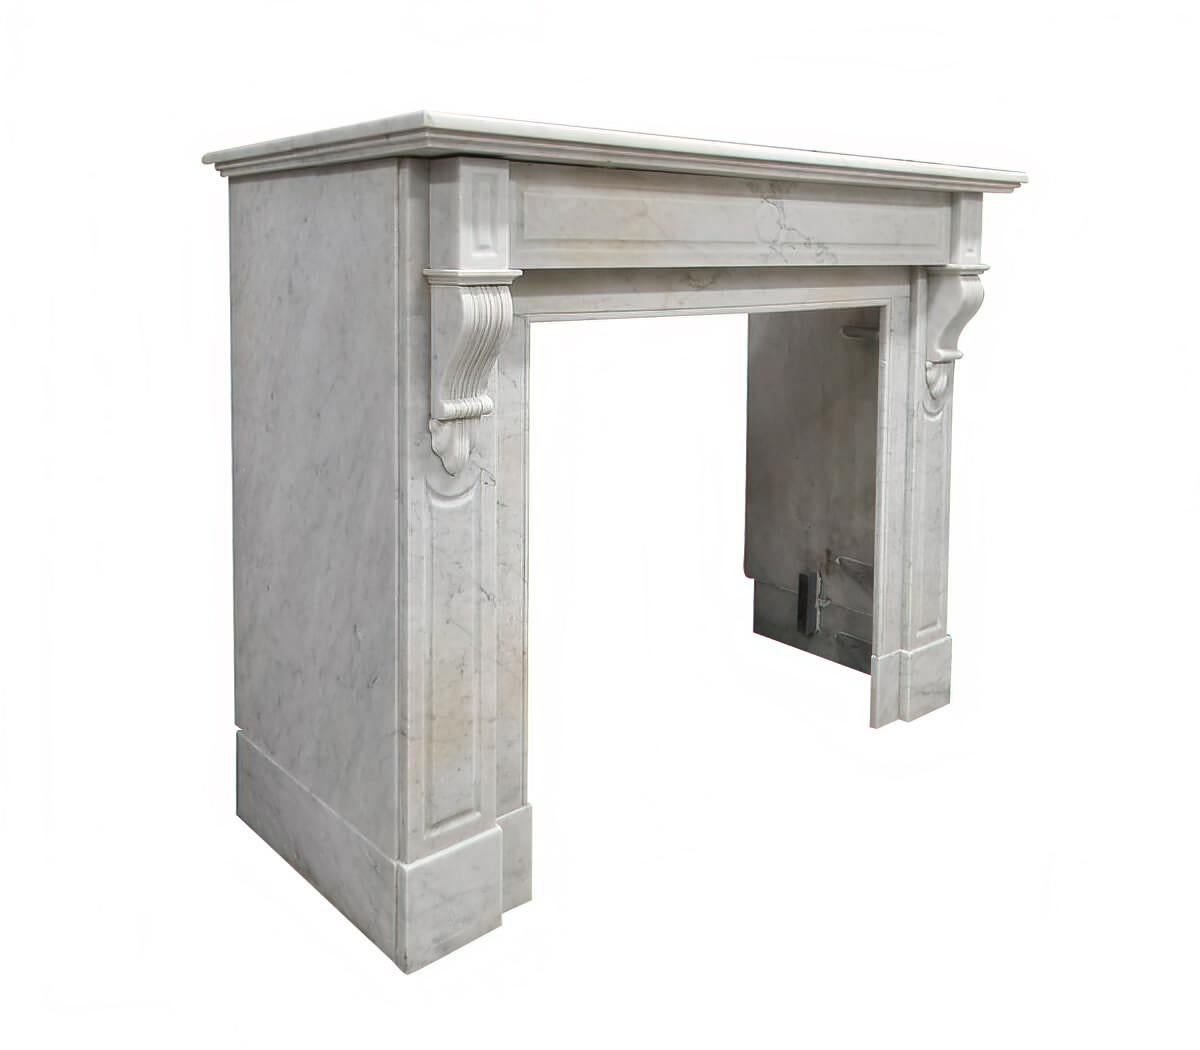 Antique white marble modillion fireplace mantel from the 19th Century,
to place around the chimney.